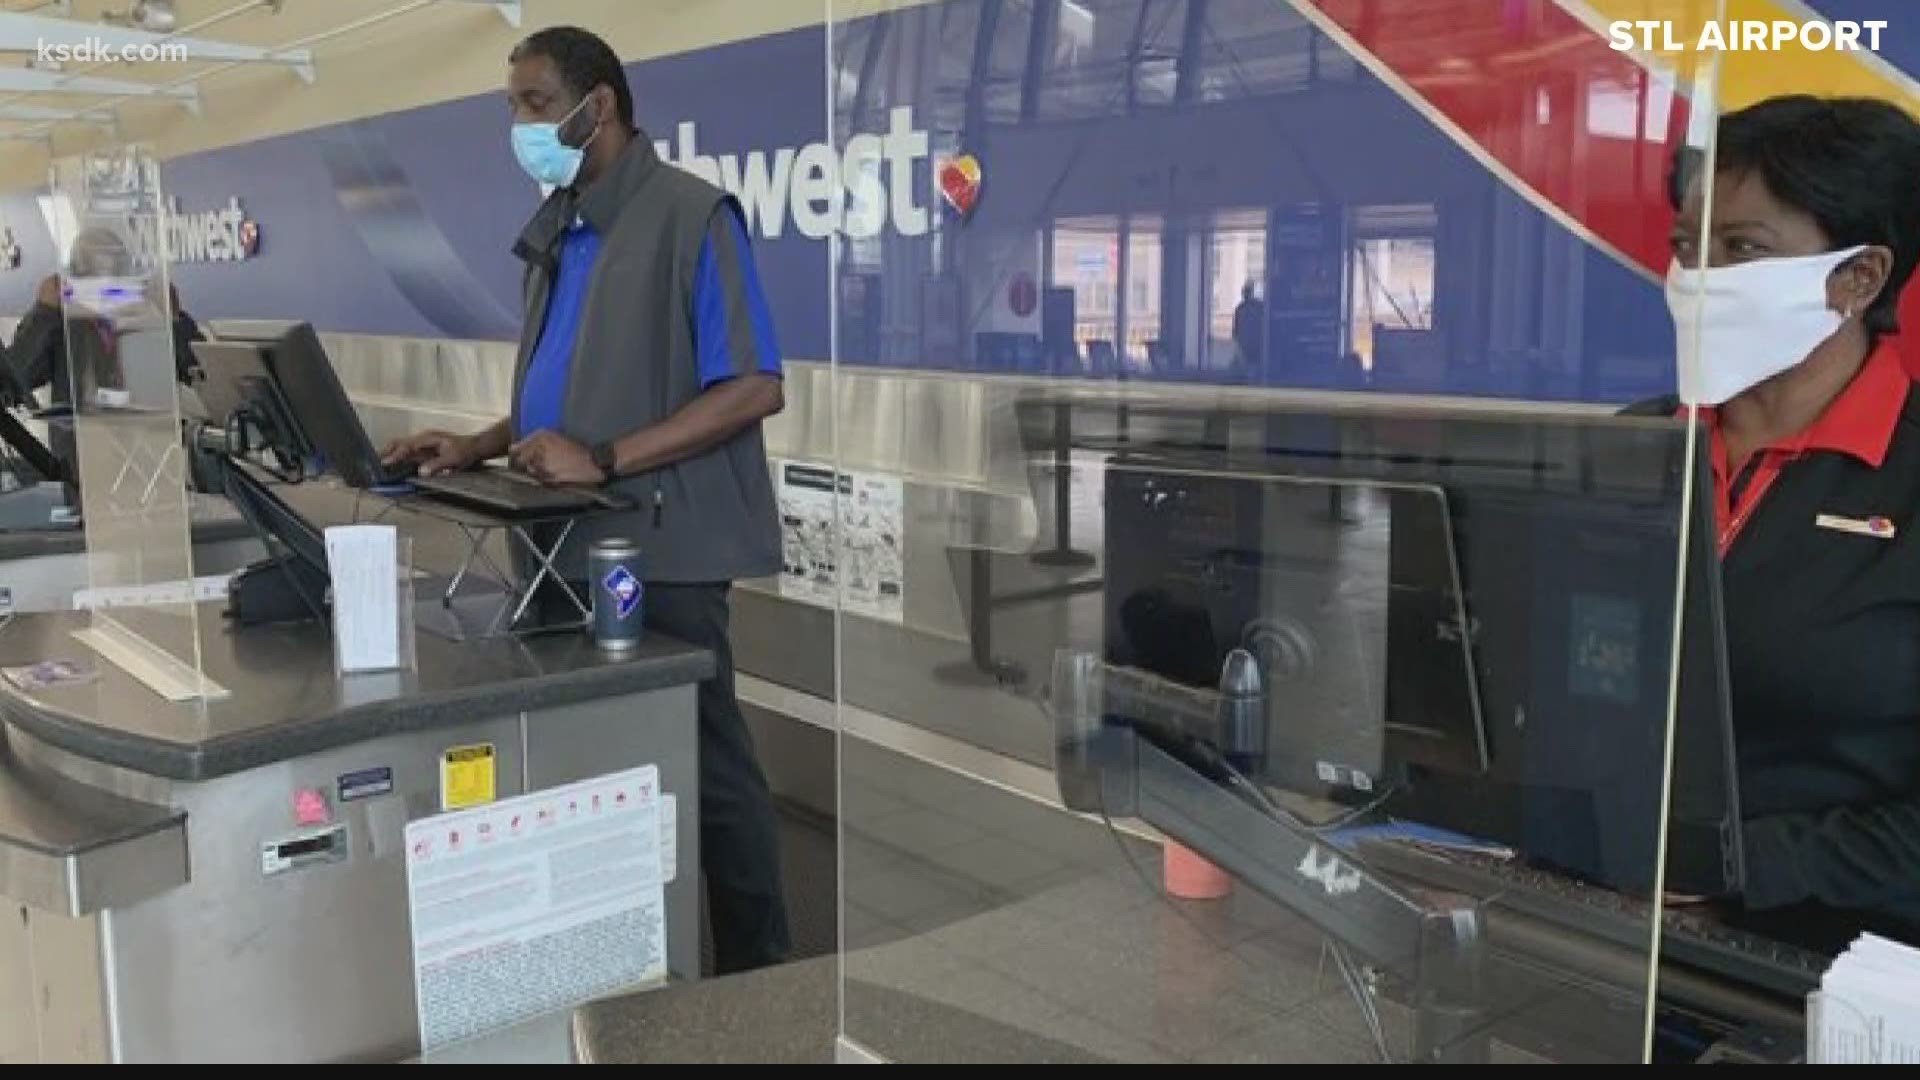 As stay-at-home orders begin to lift, Lambert Airport is taking even more precautions to put travelers at ease.